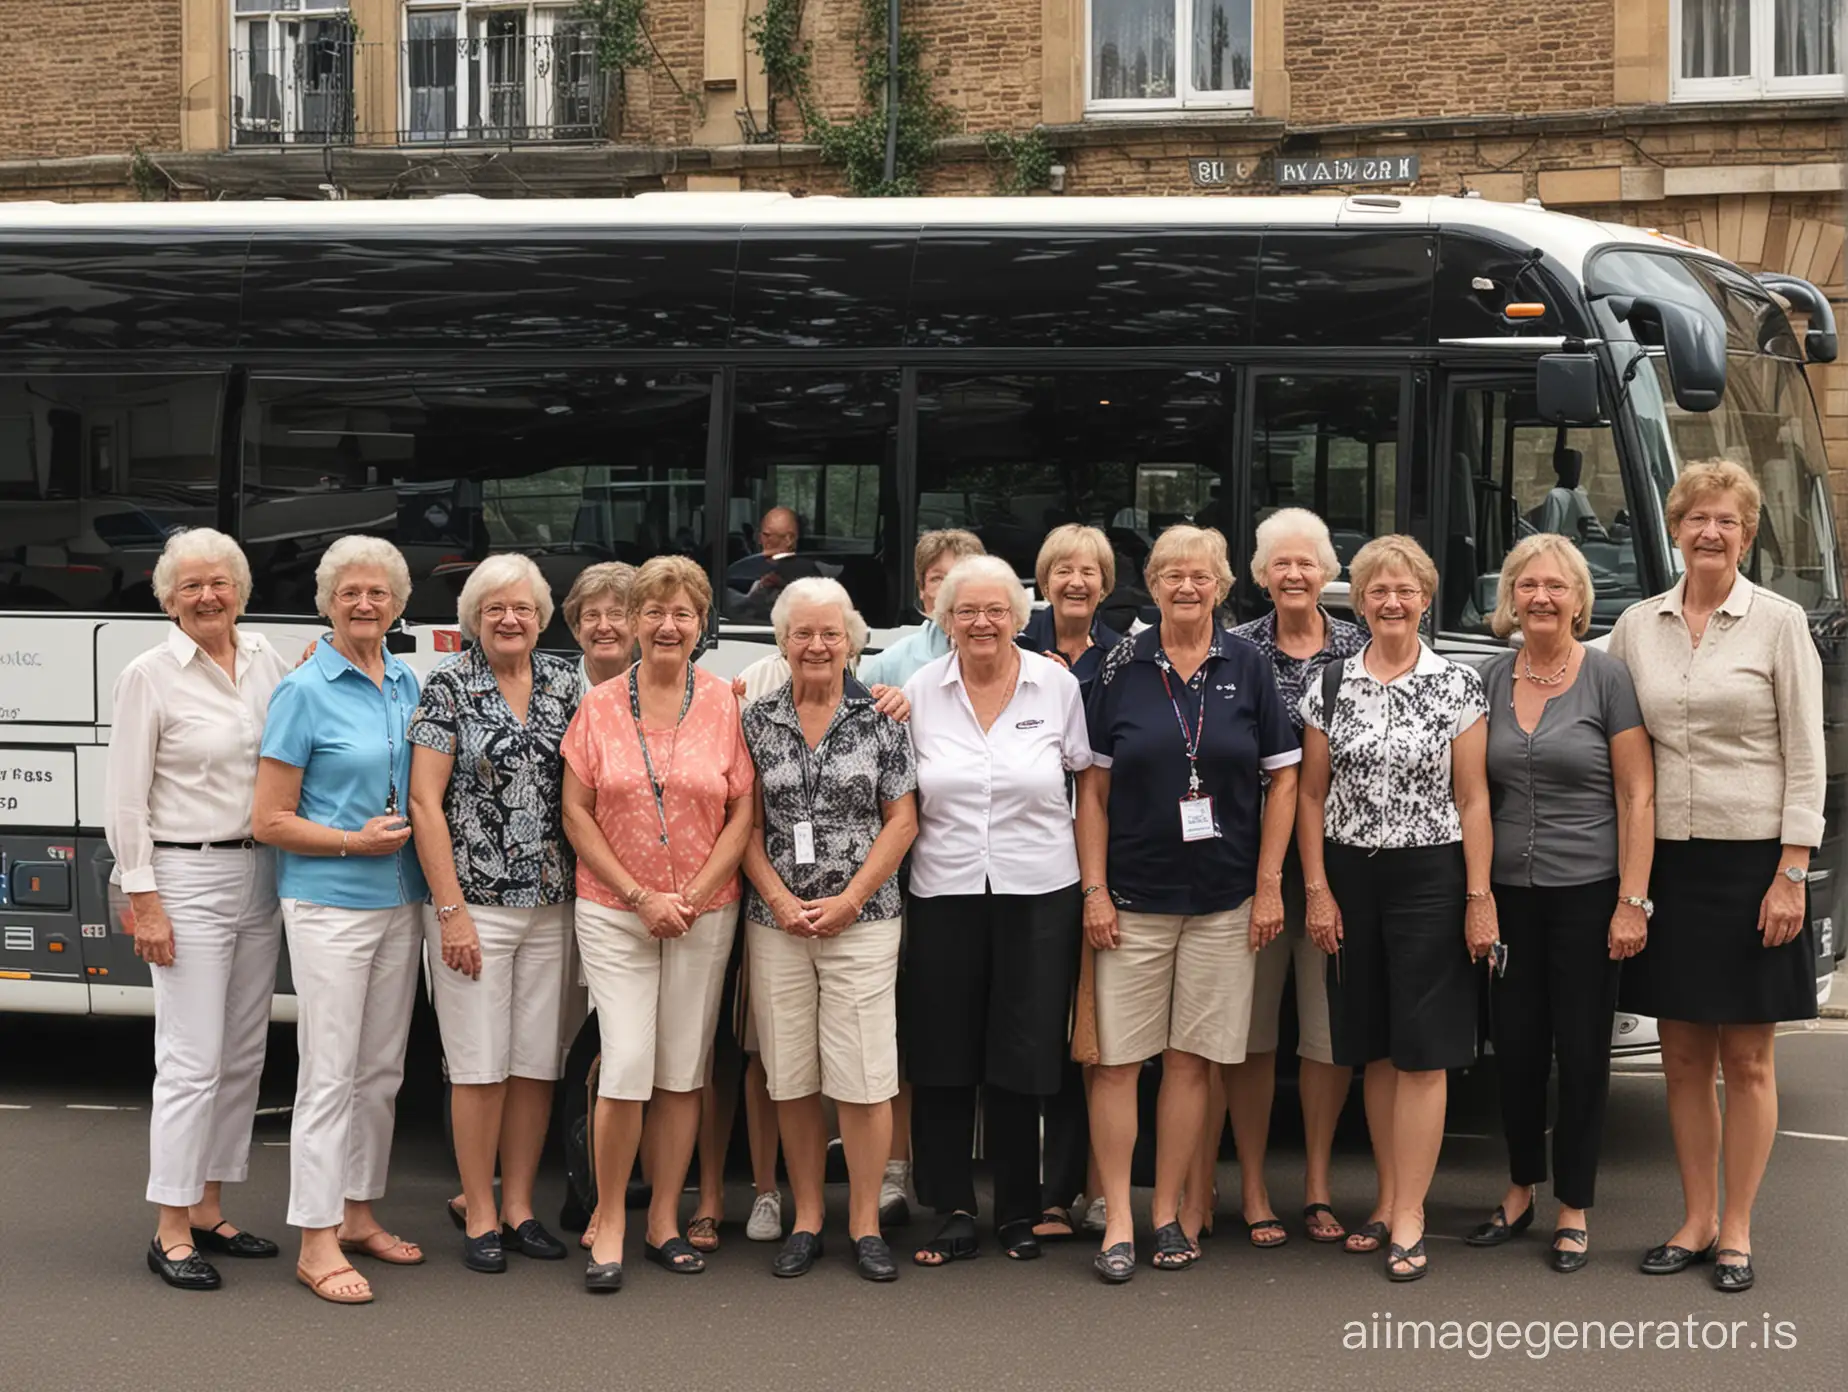 Senior-Travel-Group-Posing-in-Front-of-a-Classic-Coach